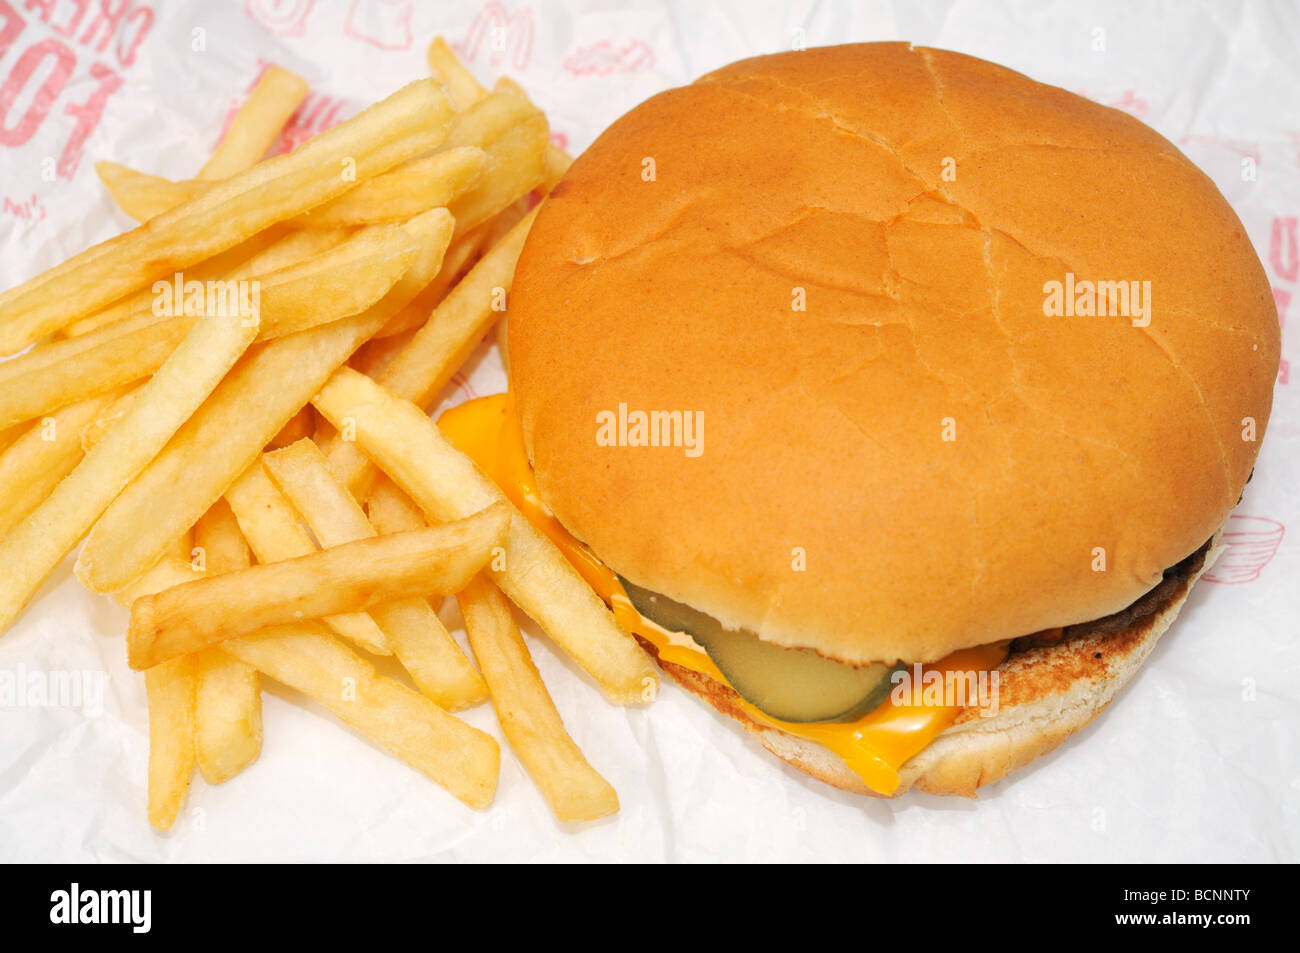 Mcdonalds cheeseburger and french fries on open wrapper Stock Photo